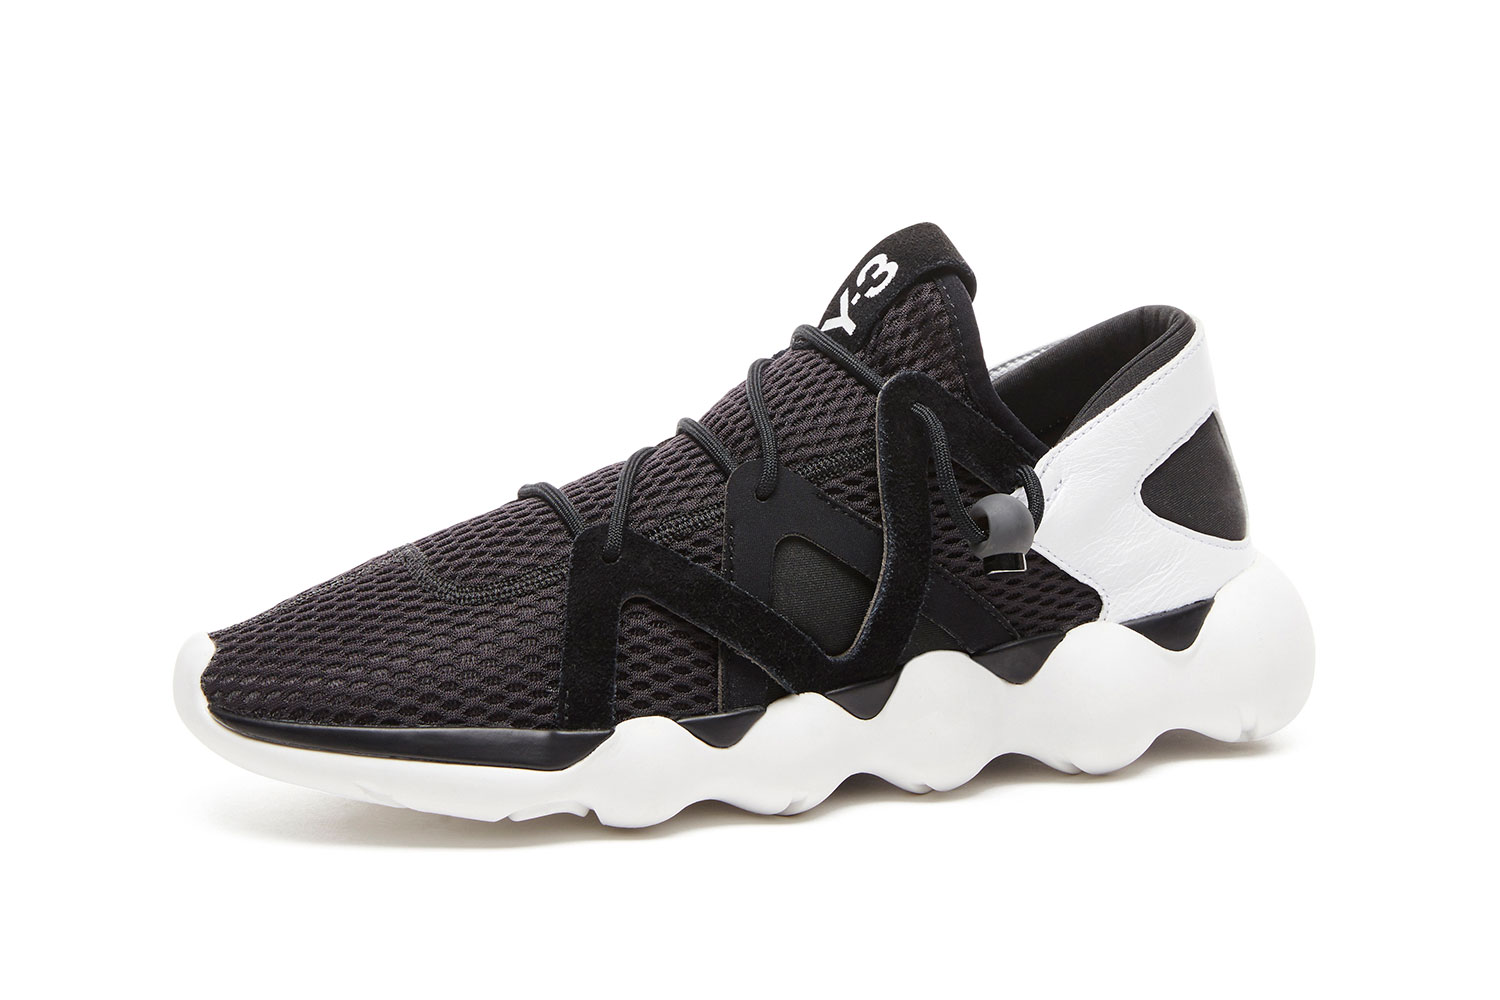 Y-3 Introduce the Kyujo Low for Spring/Summer 2016